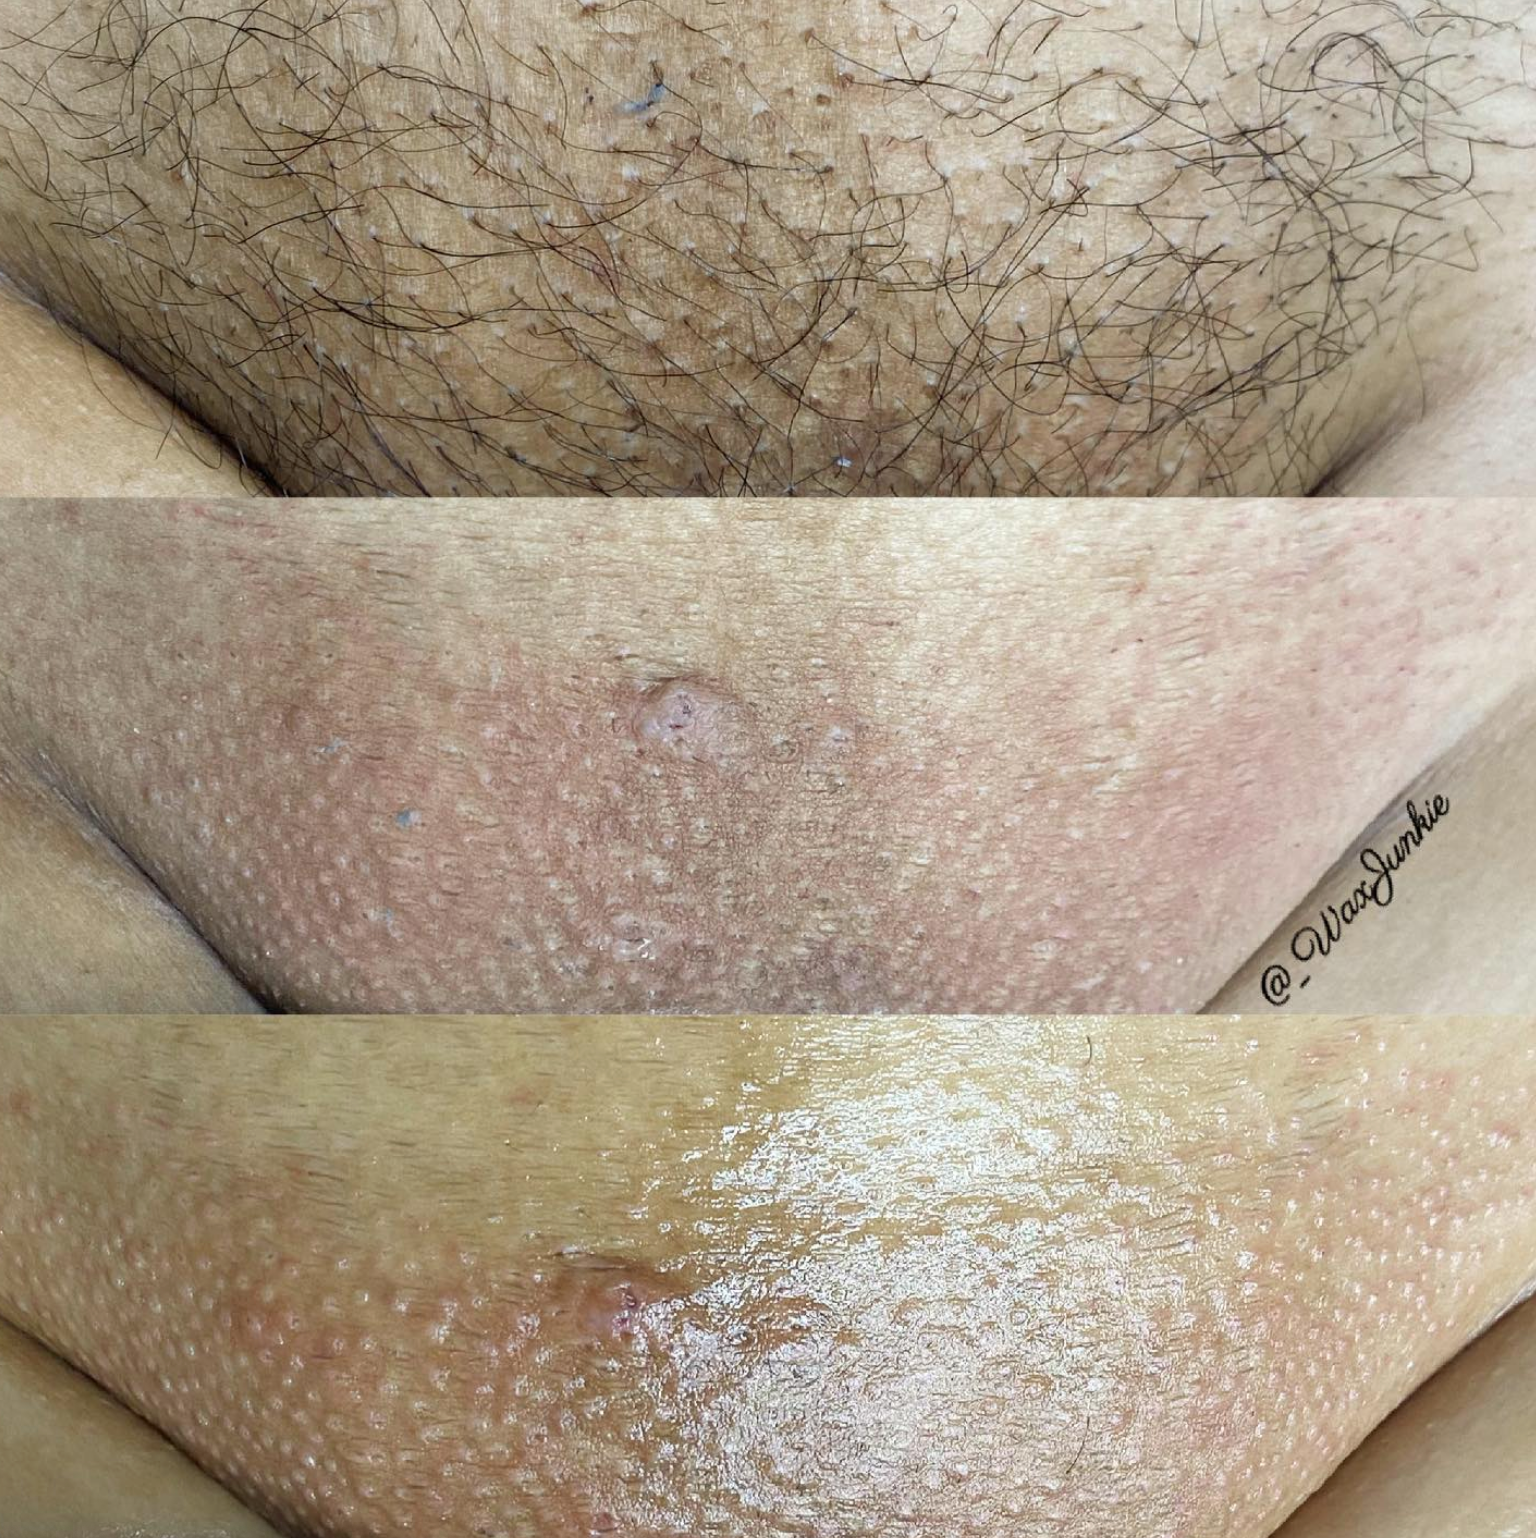 Best of Brazilian wax before and after pictures